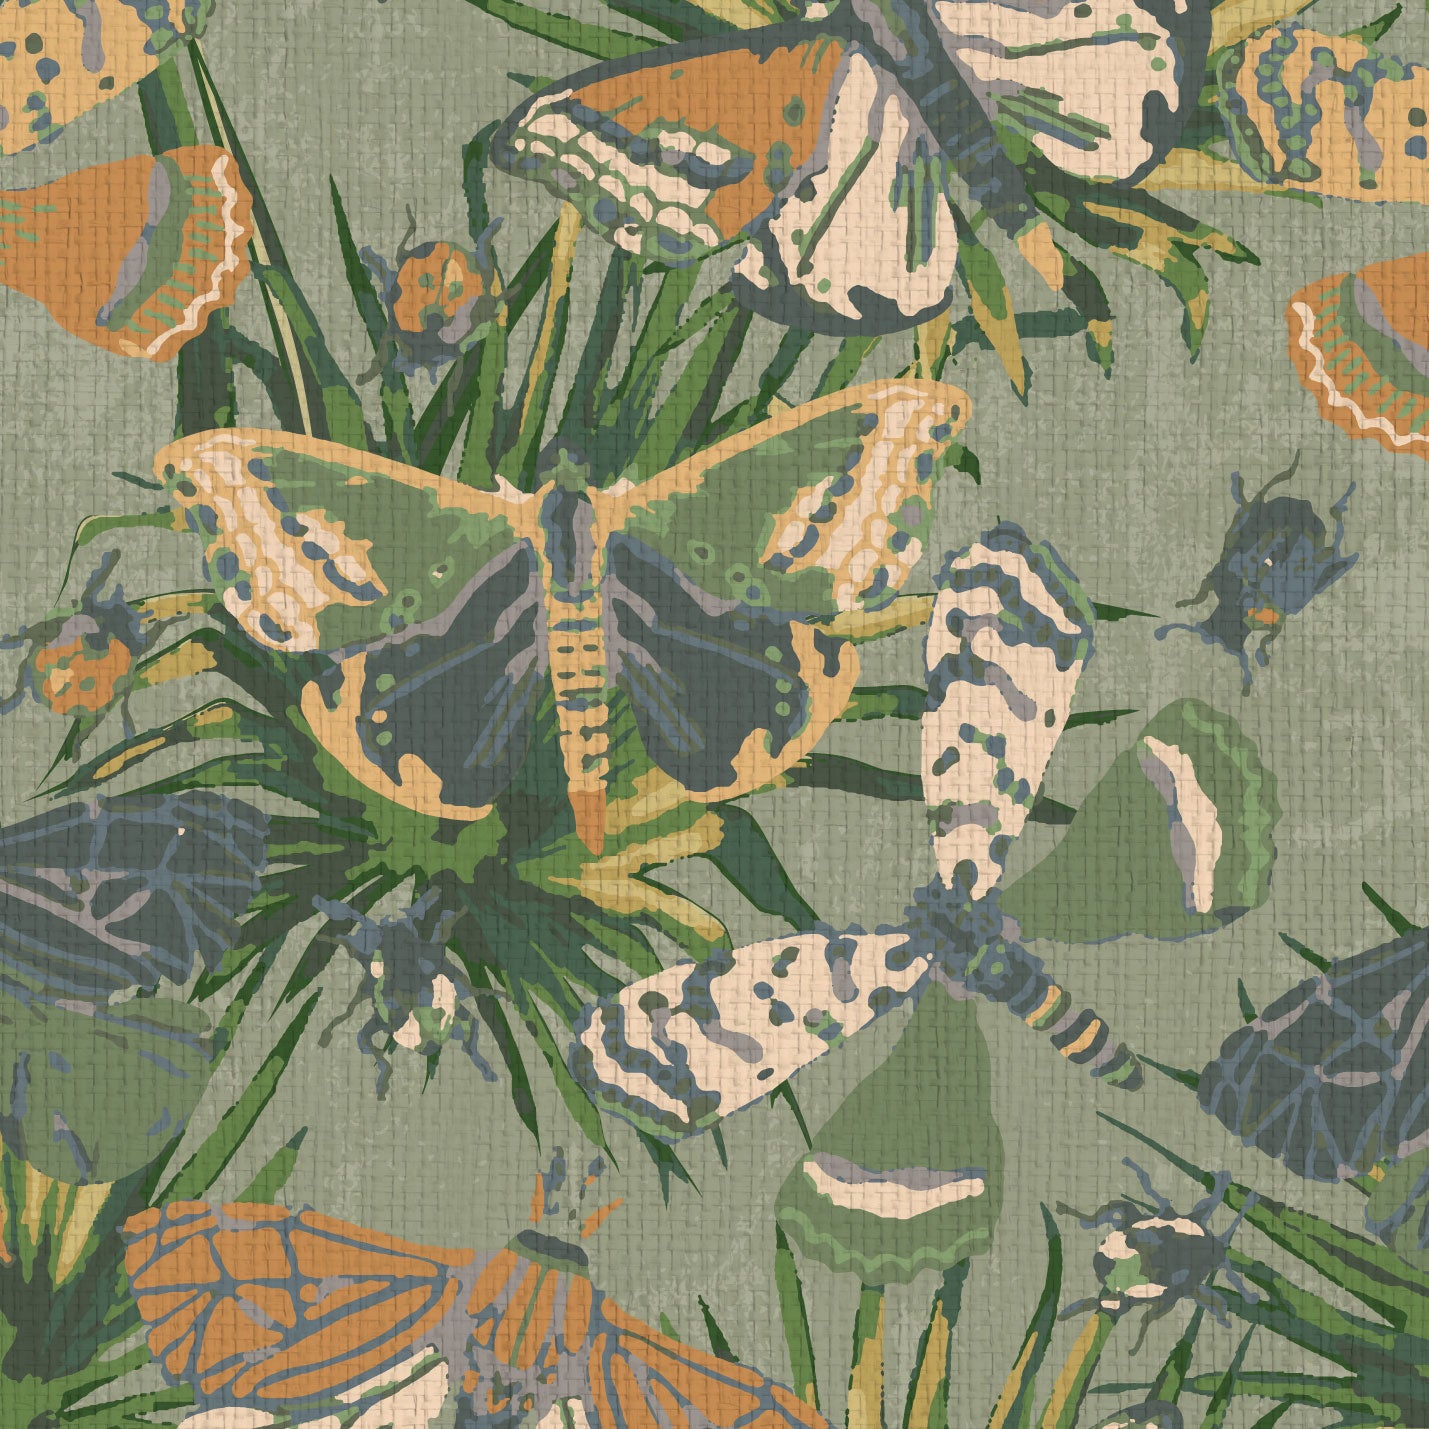 printed wallpaper with allover butterflies, palm leaves and mini insects overlapped in an oversized print.Grasscloth wallpaper Natural Textured Eco-Friendly Non-toxic High-quality Sustainable Interior Design Bold Custom Tailor-made Retro chic Bold tropical butterfly bug palm leaves animals botanical garden nature kids playroom bedroom nursery green moss jungle olive paperweave paper weave